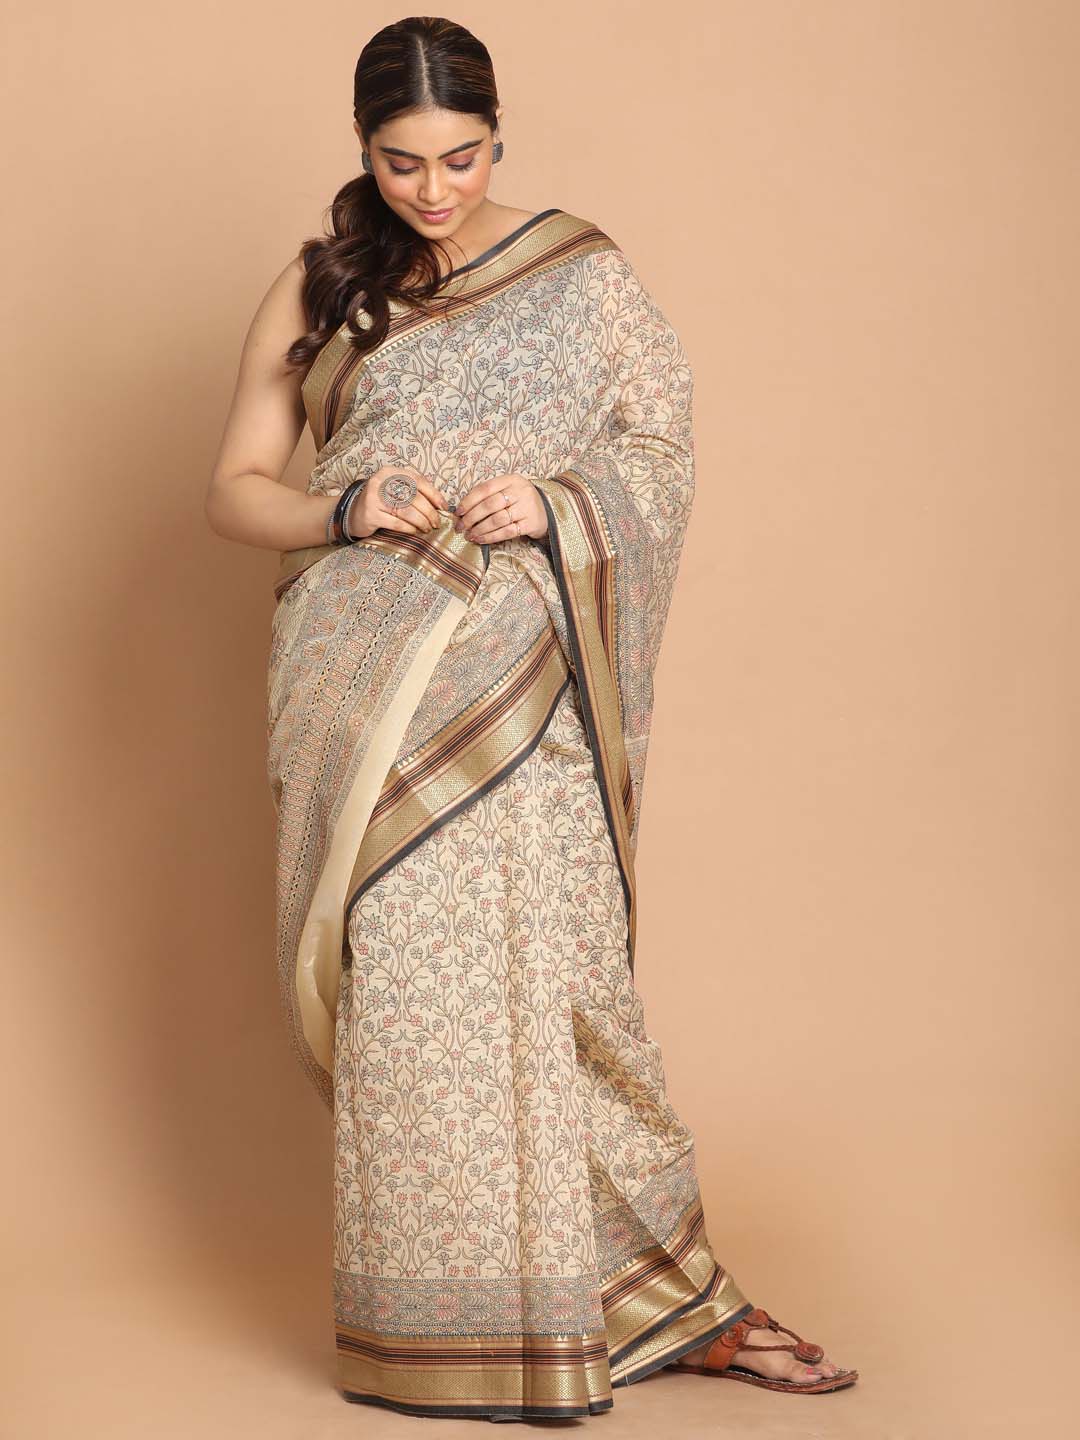 Indethnic Printed Cotton Blend Saree in Black - View 1